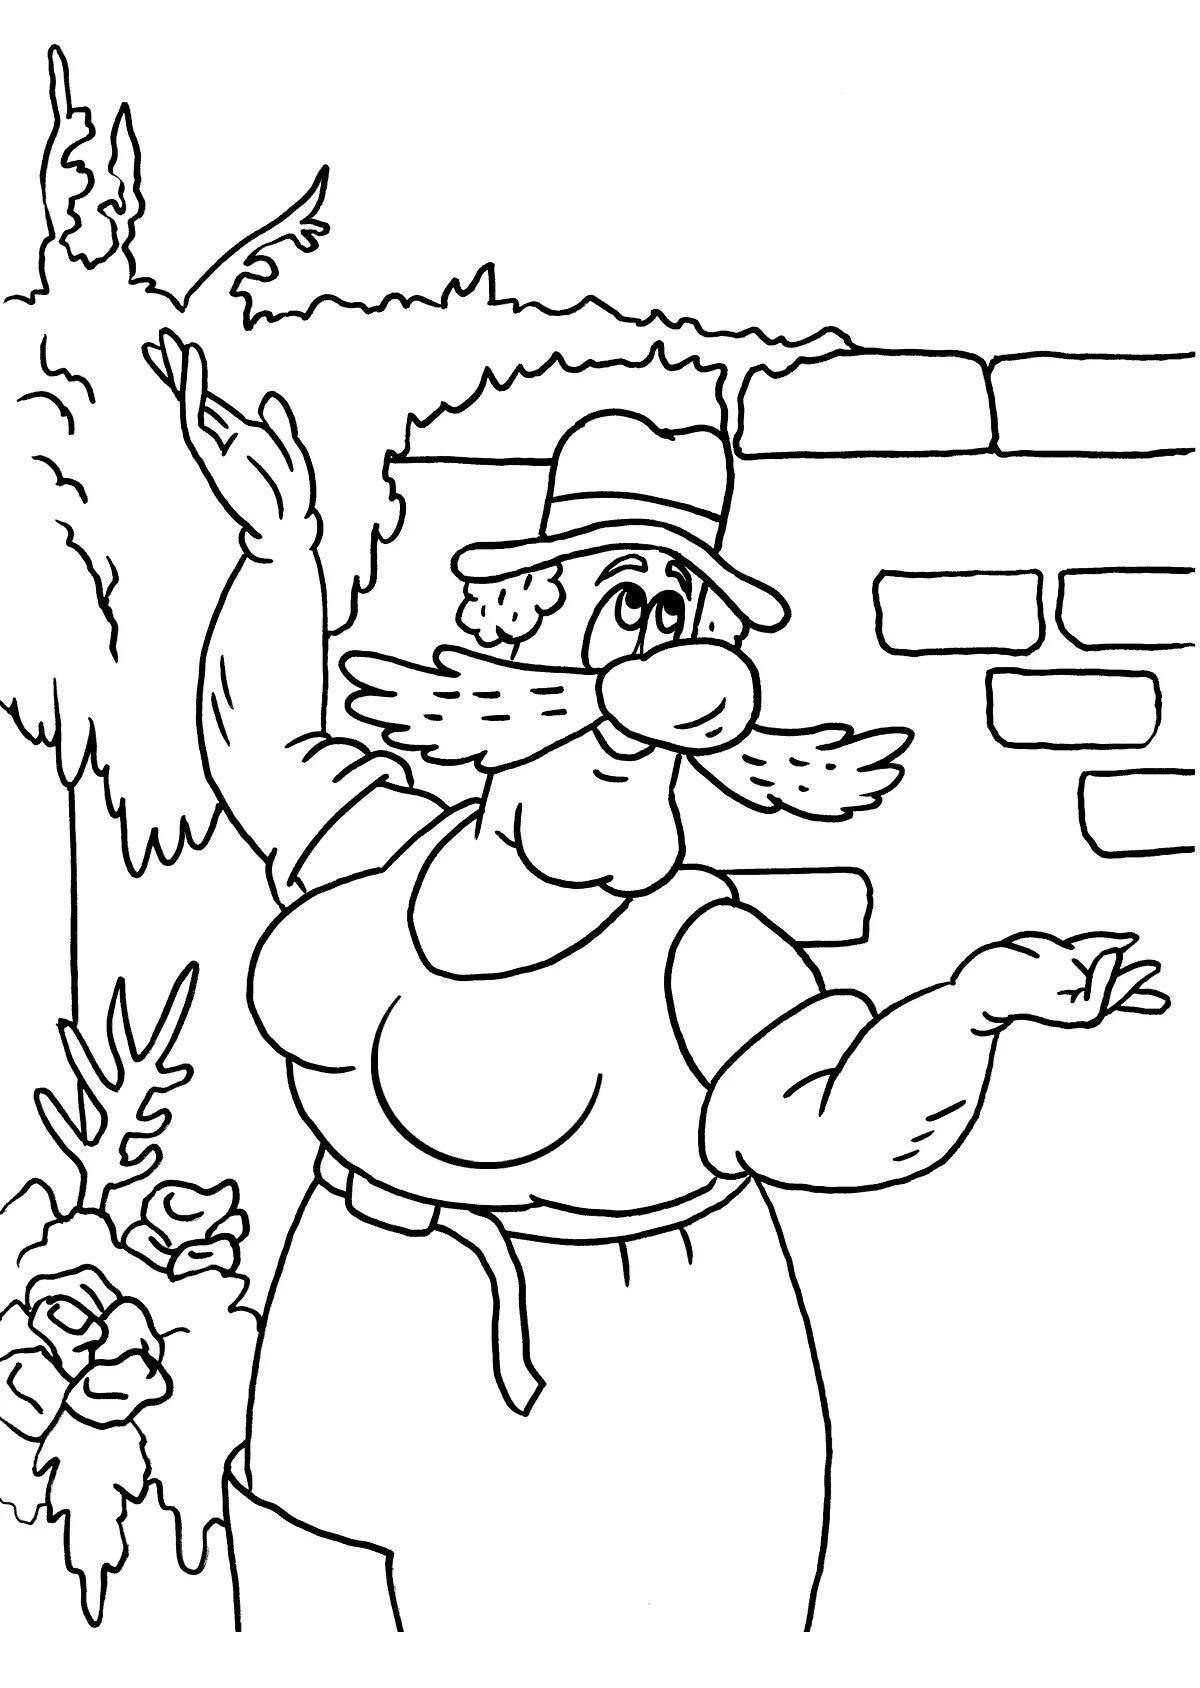 Bold funky uncle mokus coloring page